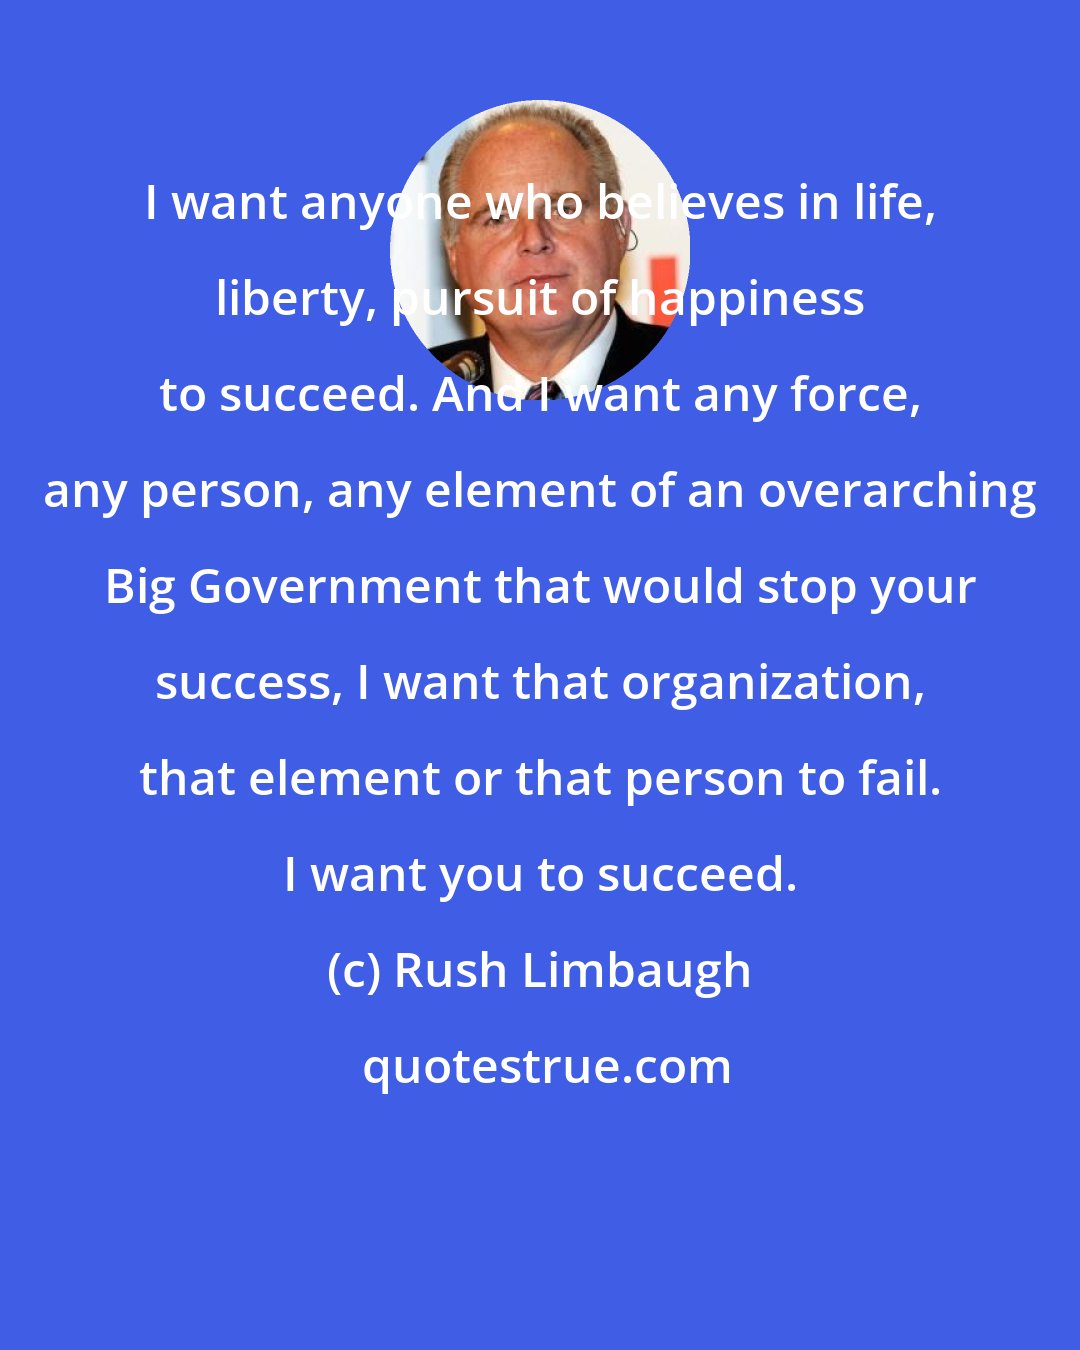 Rush Limbaugh: I want anyone who believes in life, liberty, pursuit of happiness to succeed. And I want any force, any person, any element of an overarching Big Government that would stop your success, I want that organization, that element or that person to fail. I want you to succeed.